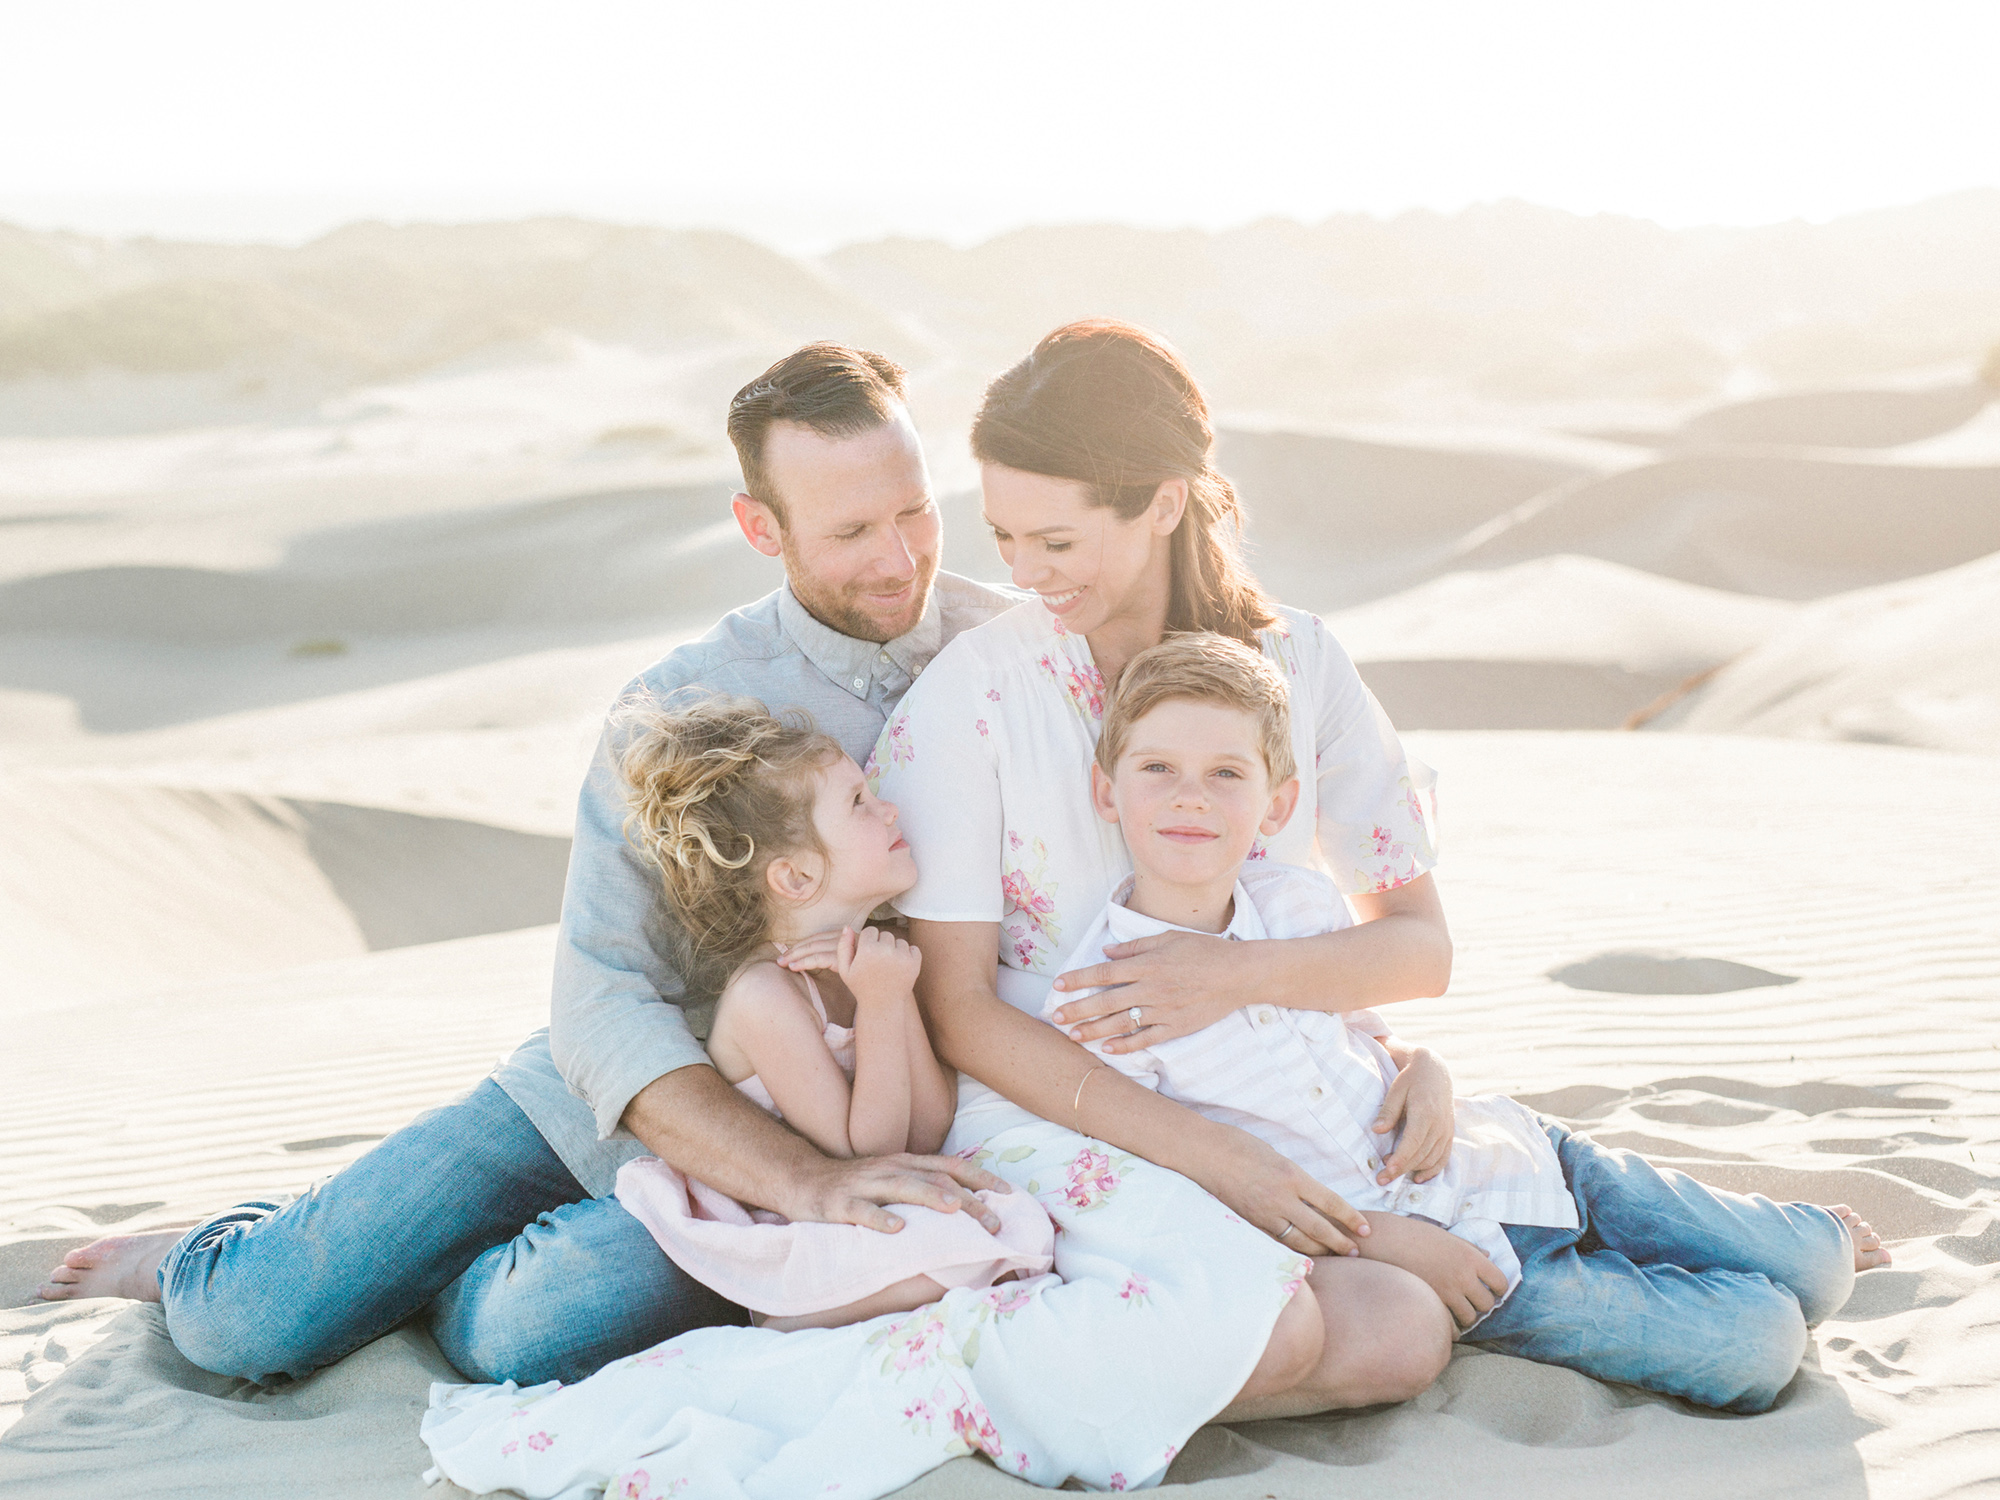 A fine art family session by DFW photographer Tenth & Grace.